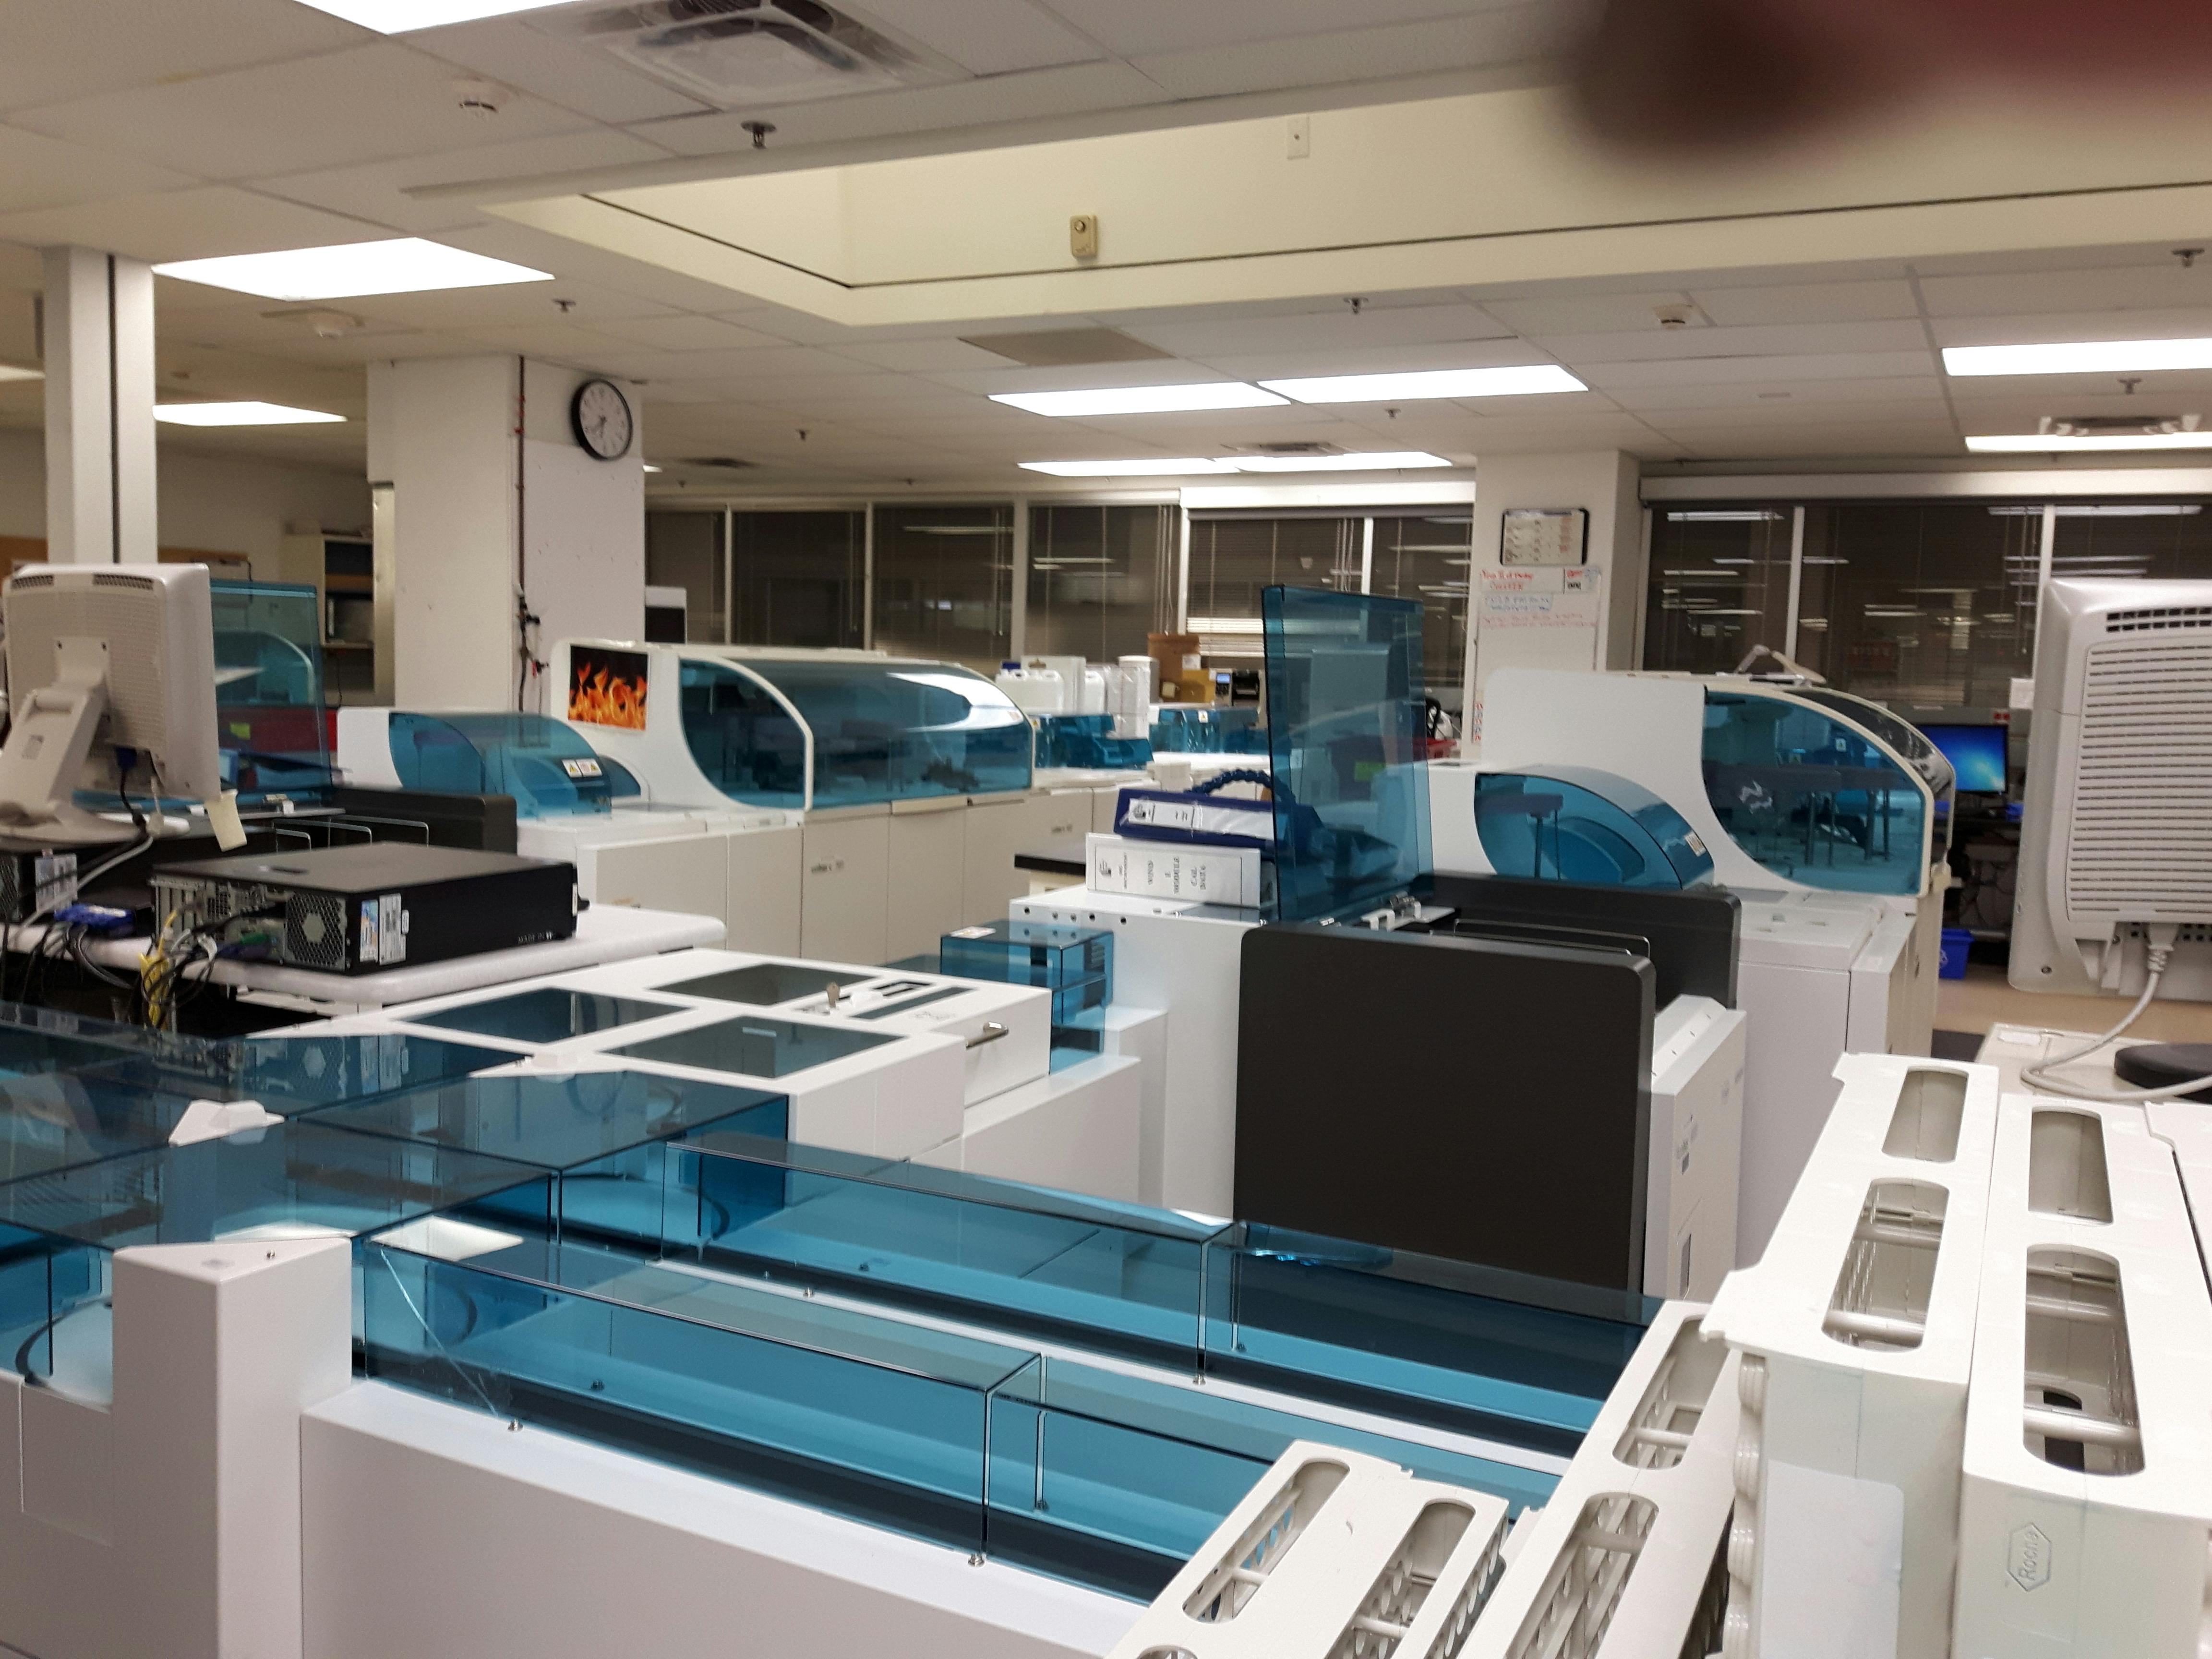 Automated lab equipment generates large numbers of common test results